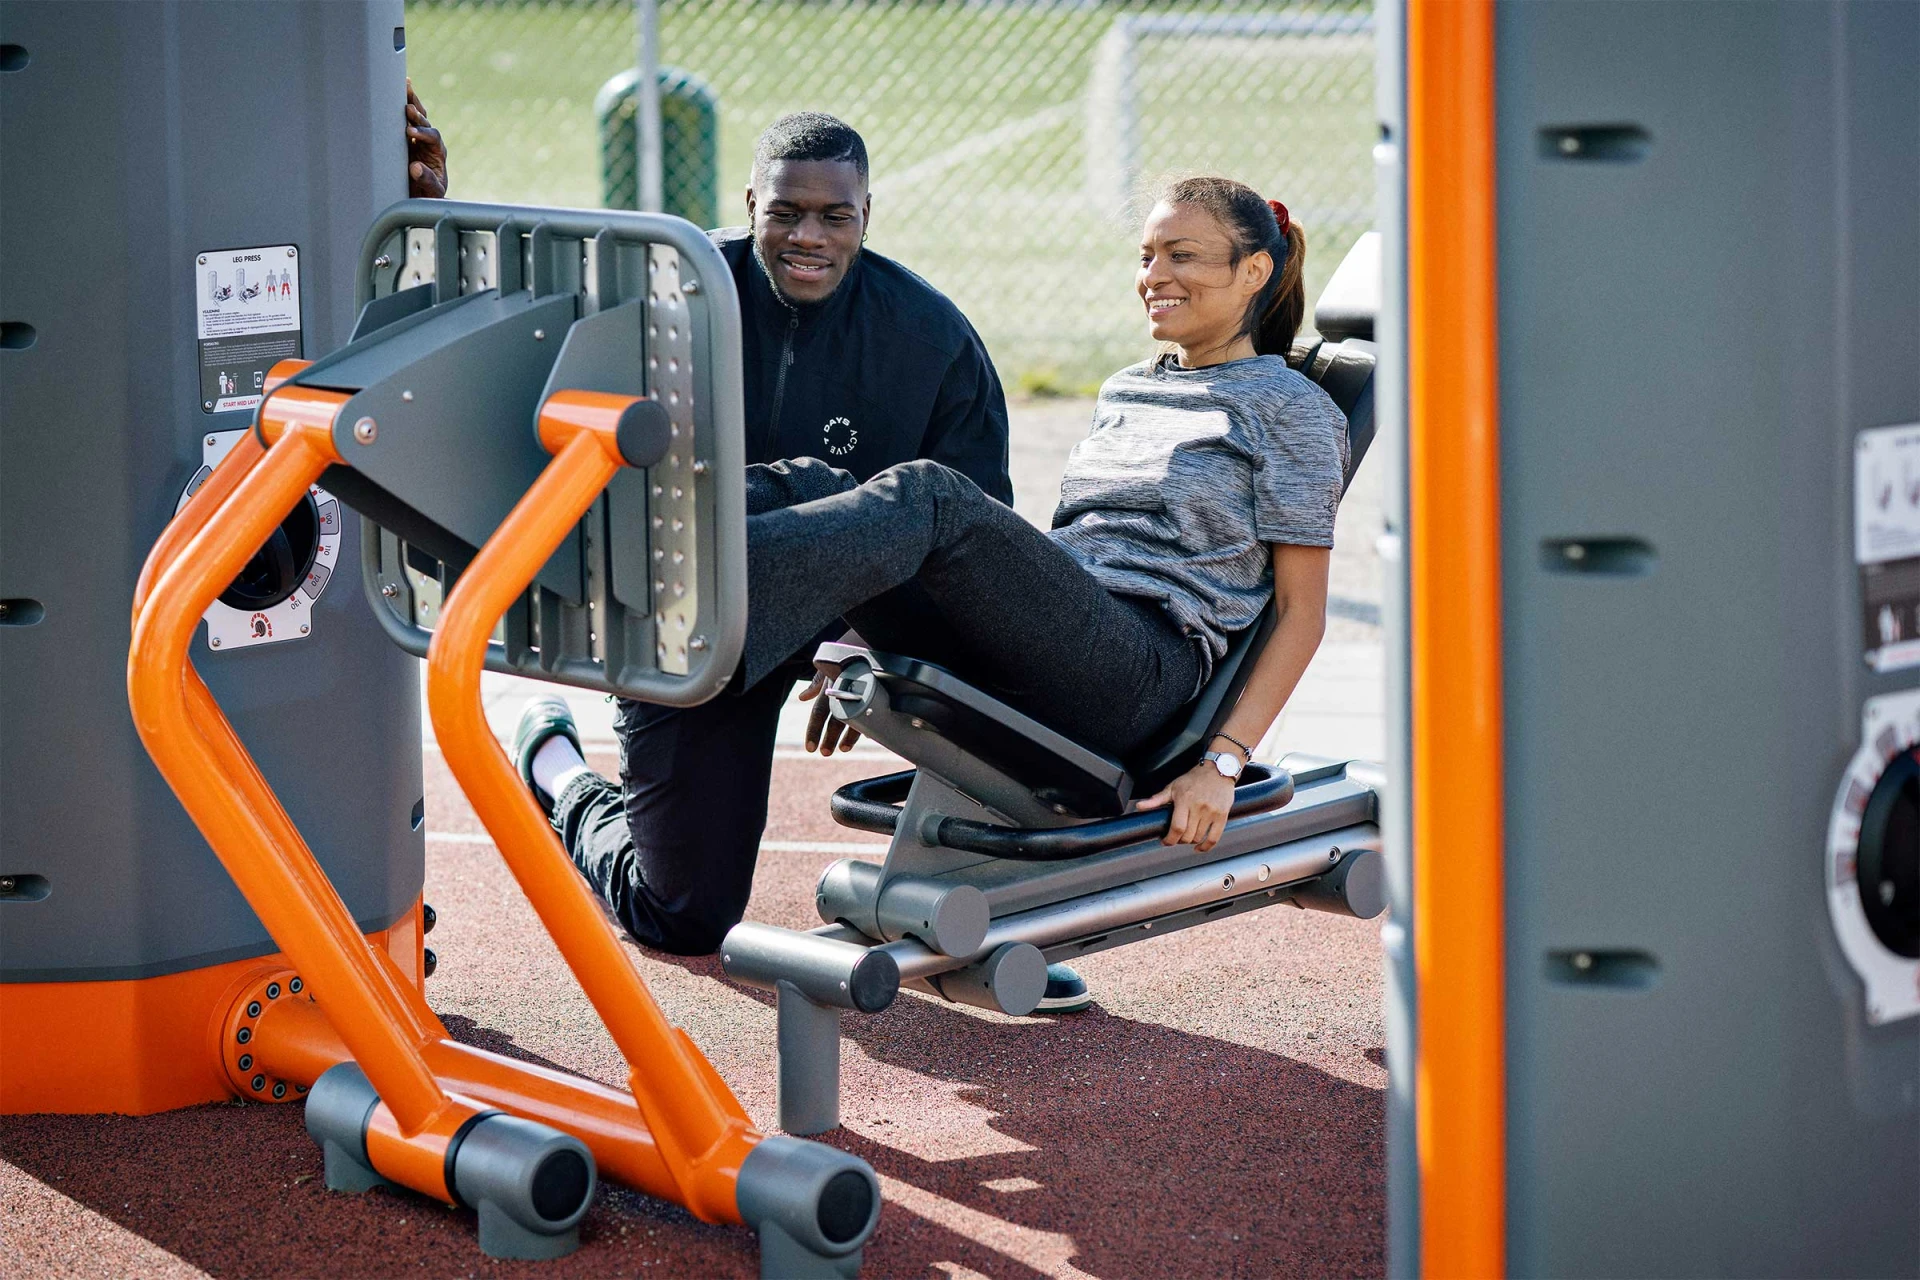 A woman working with a personal training on an outdoor leg press from KOMPAN